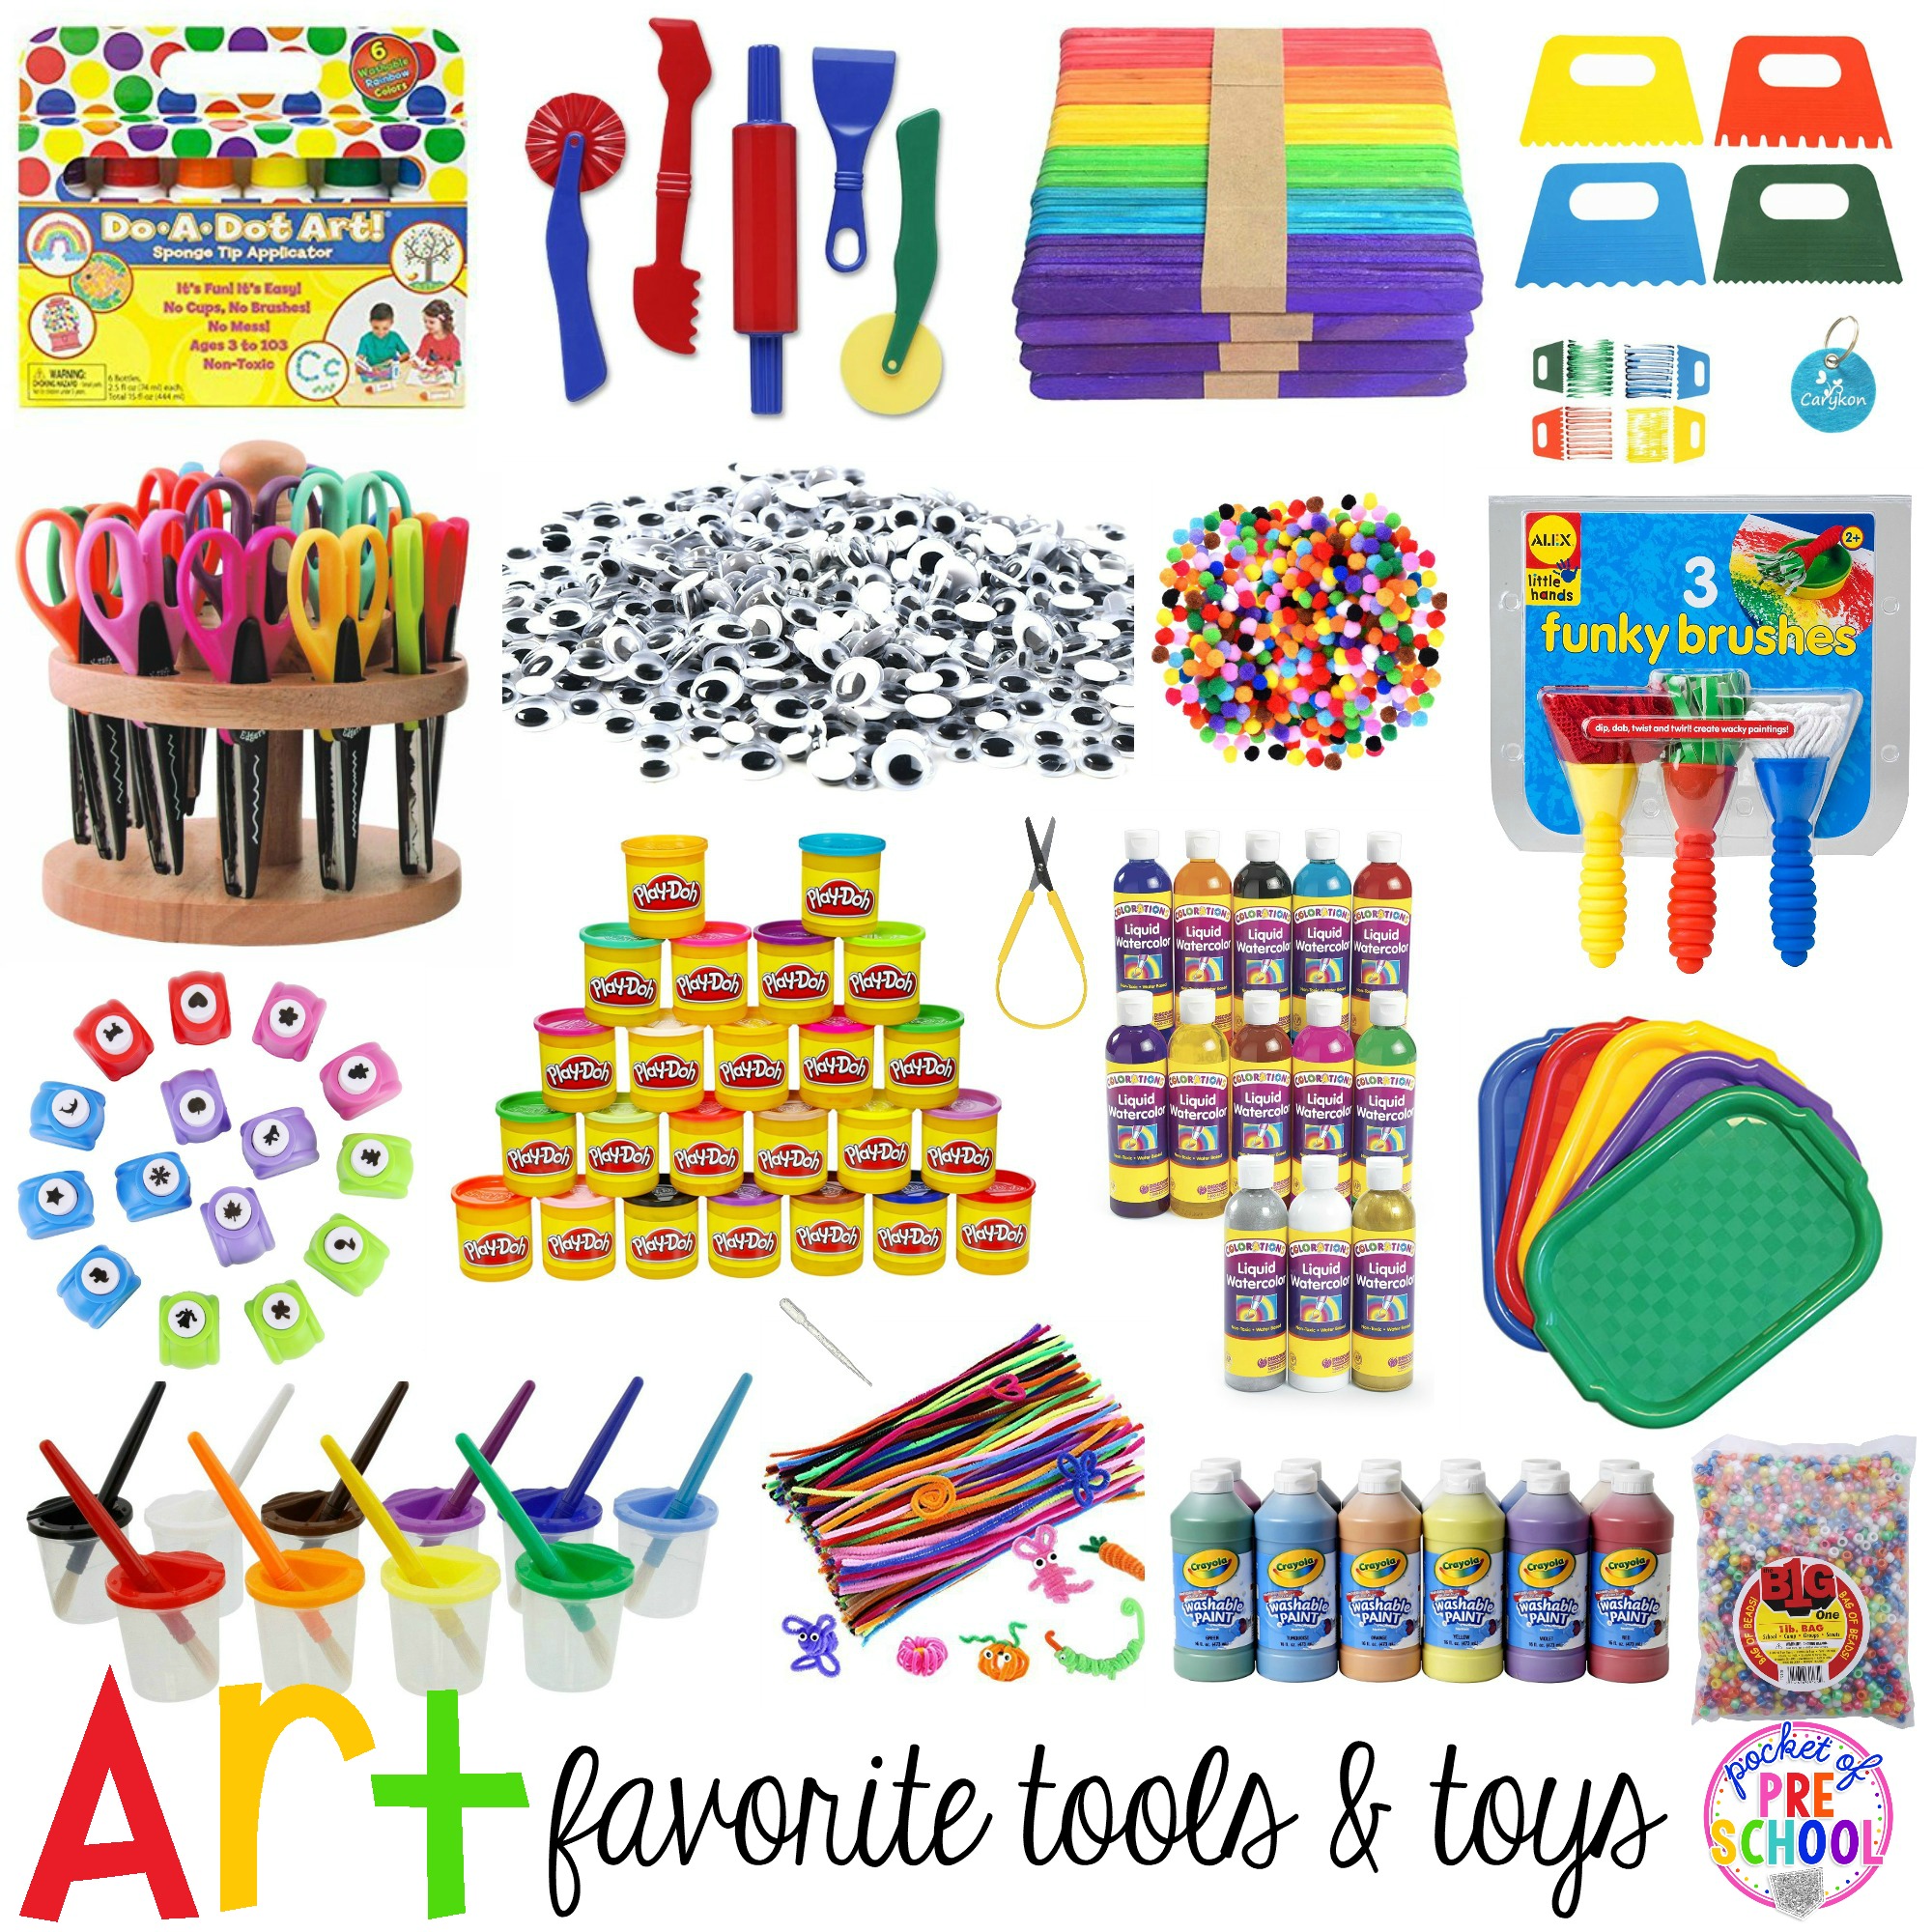 The biggest list of Art Center tools and toys for preschool, pre-k, and kindergarten! Make the art center an amazing place for your students!